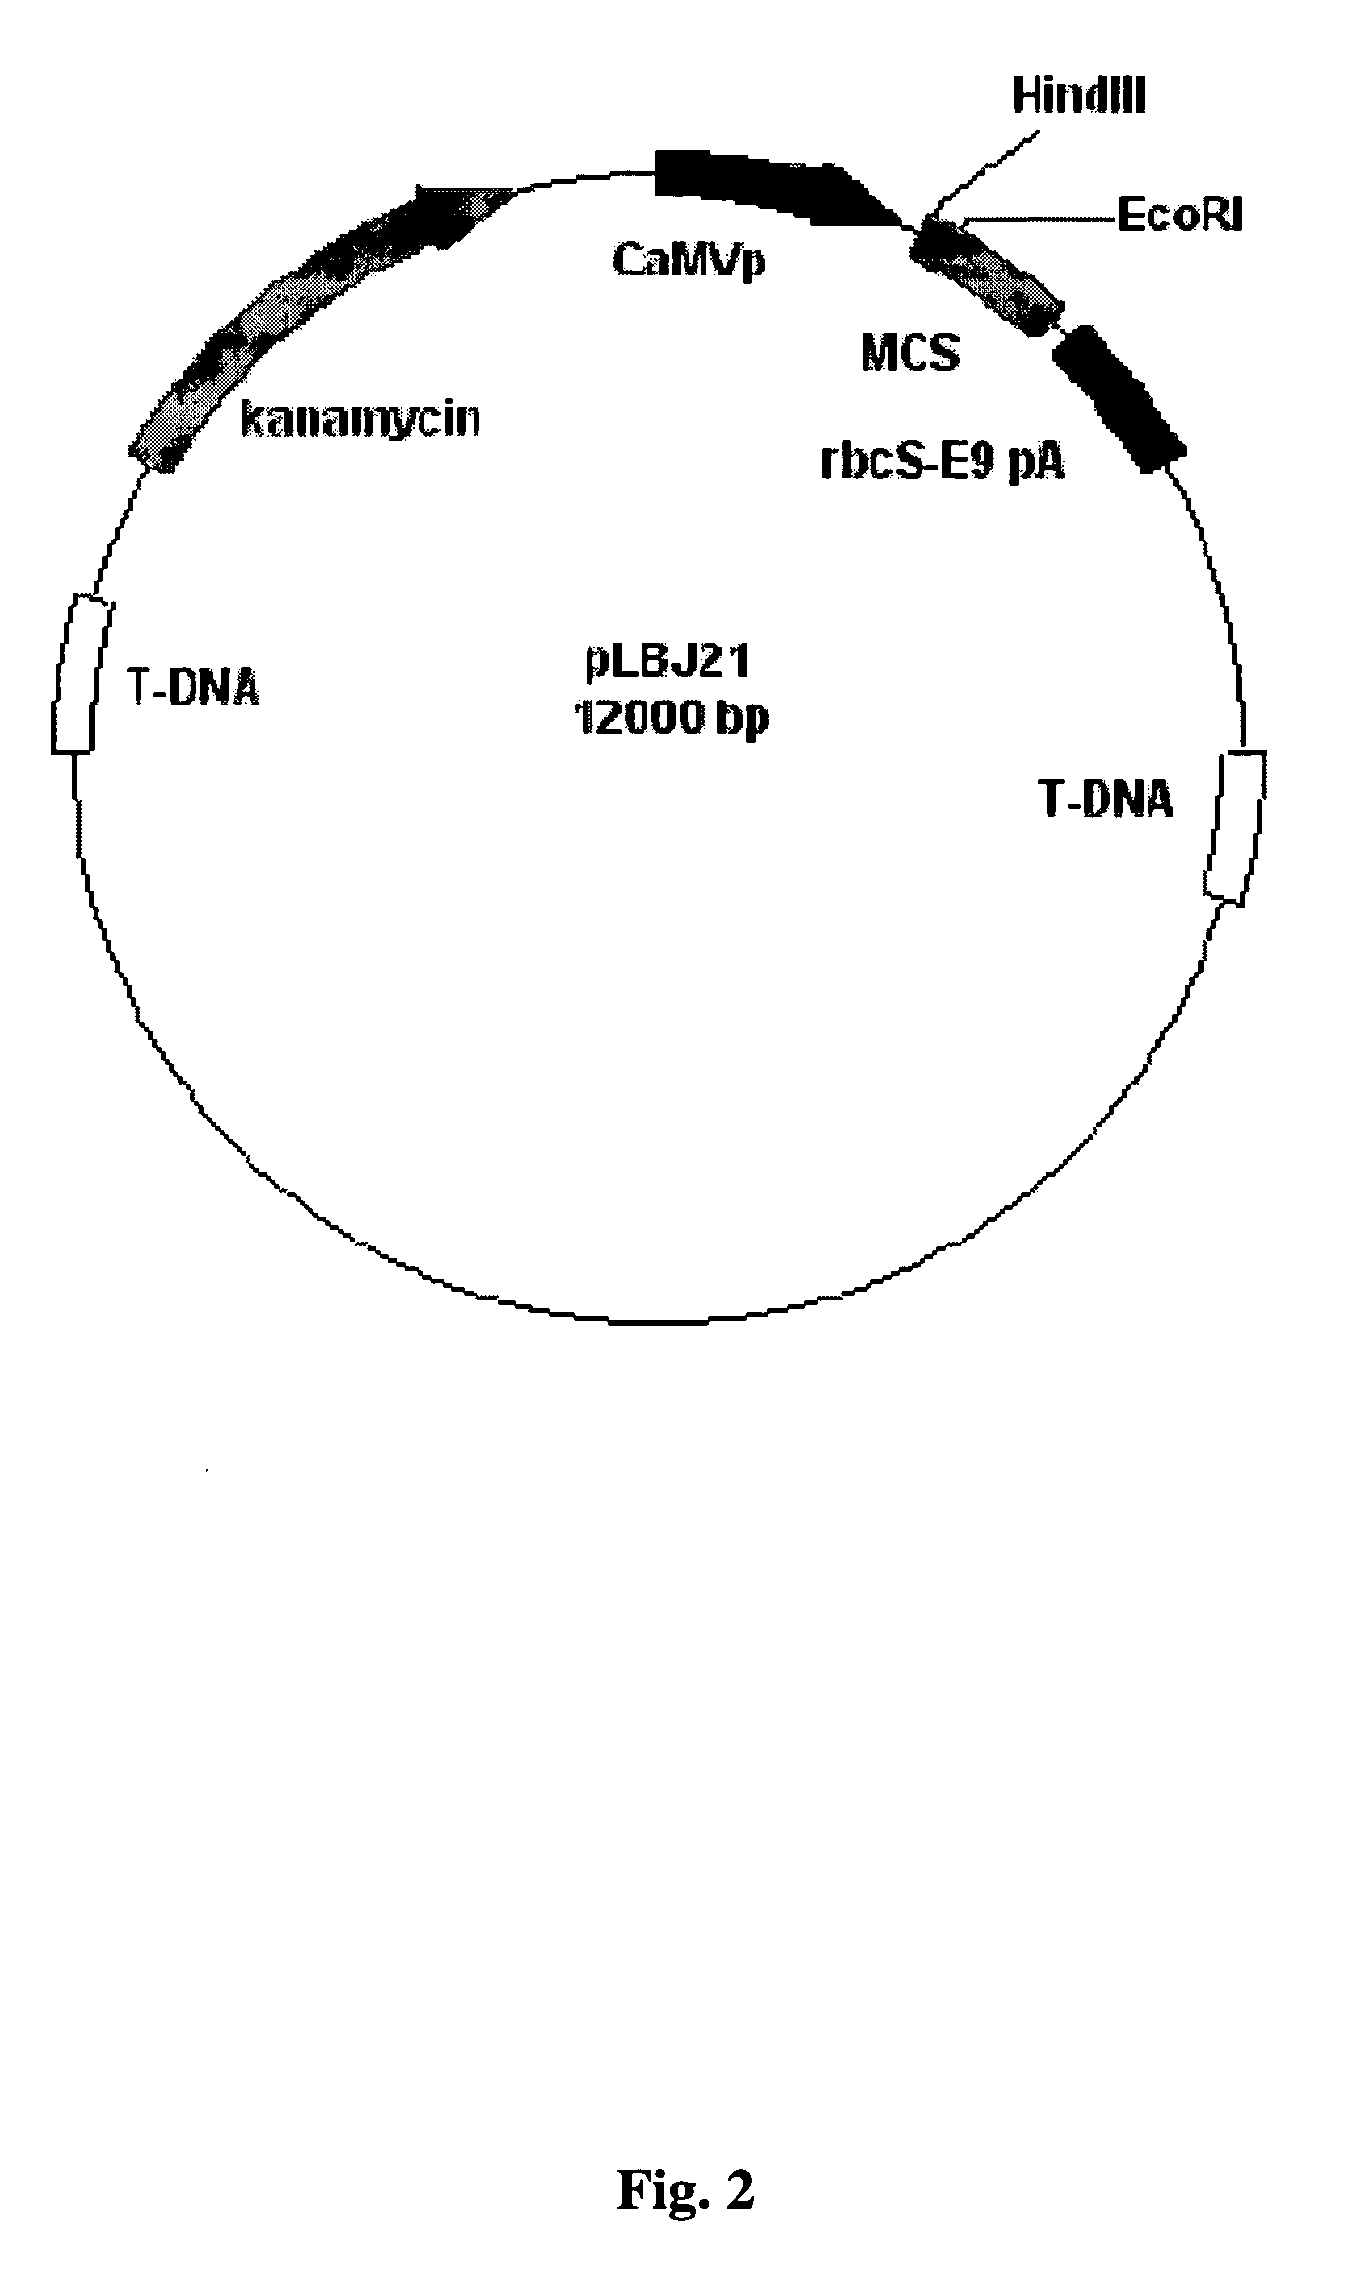 Animal immunocontraceptives expressed in plants and uses thereof